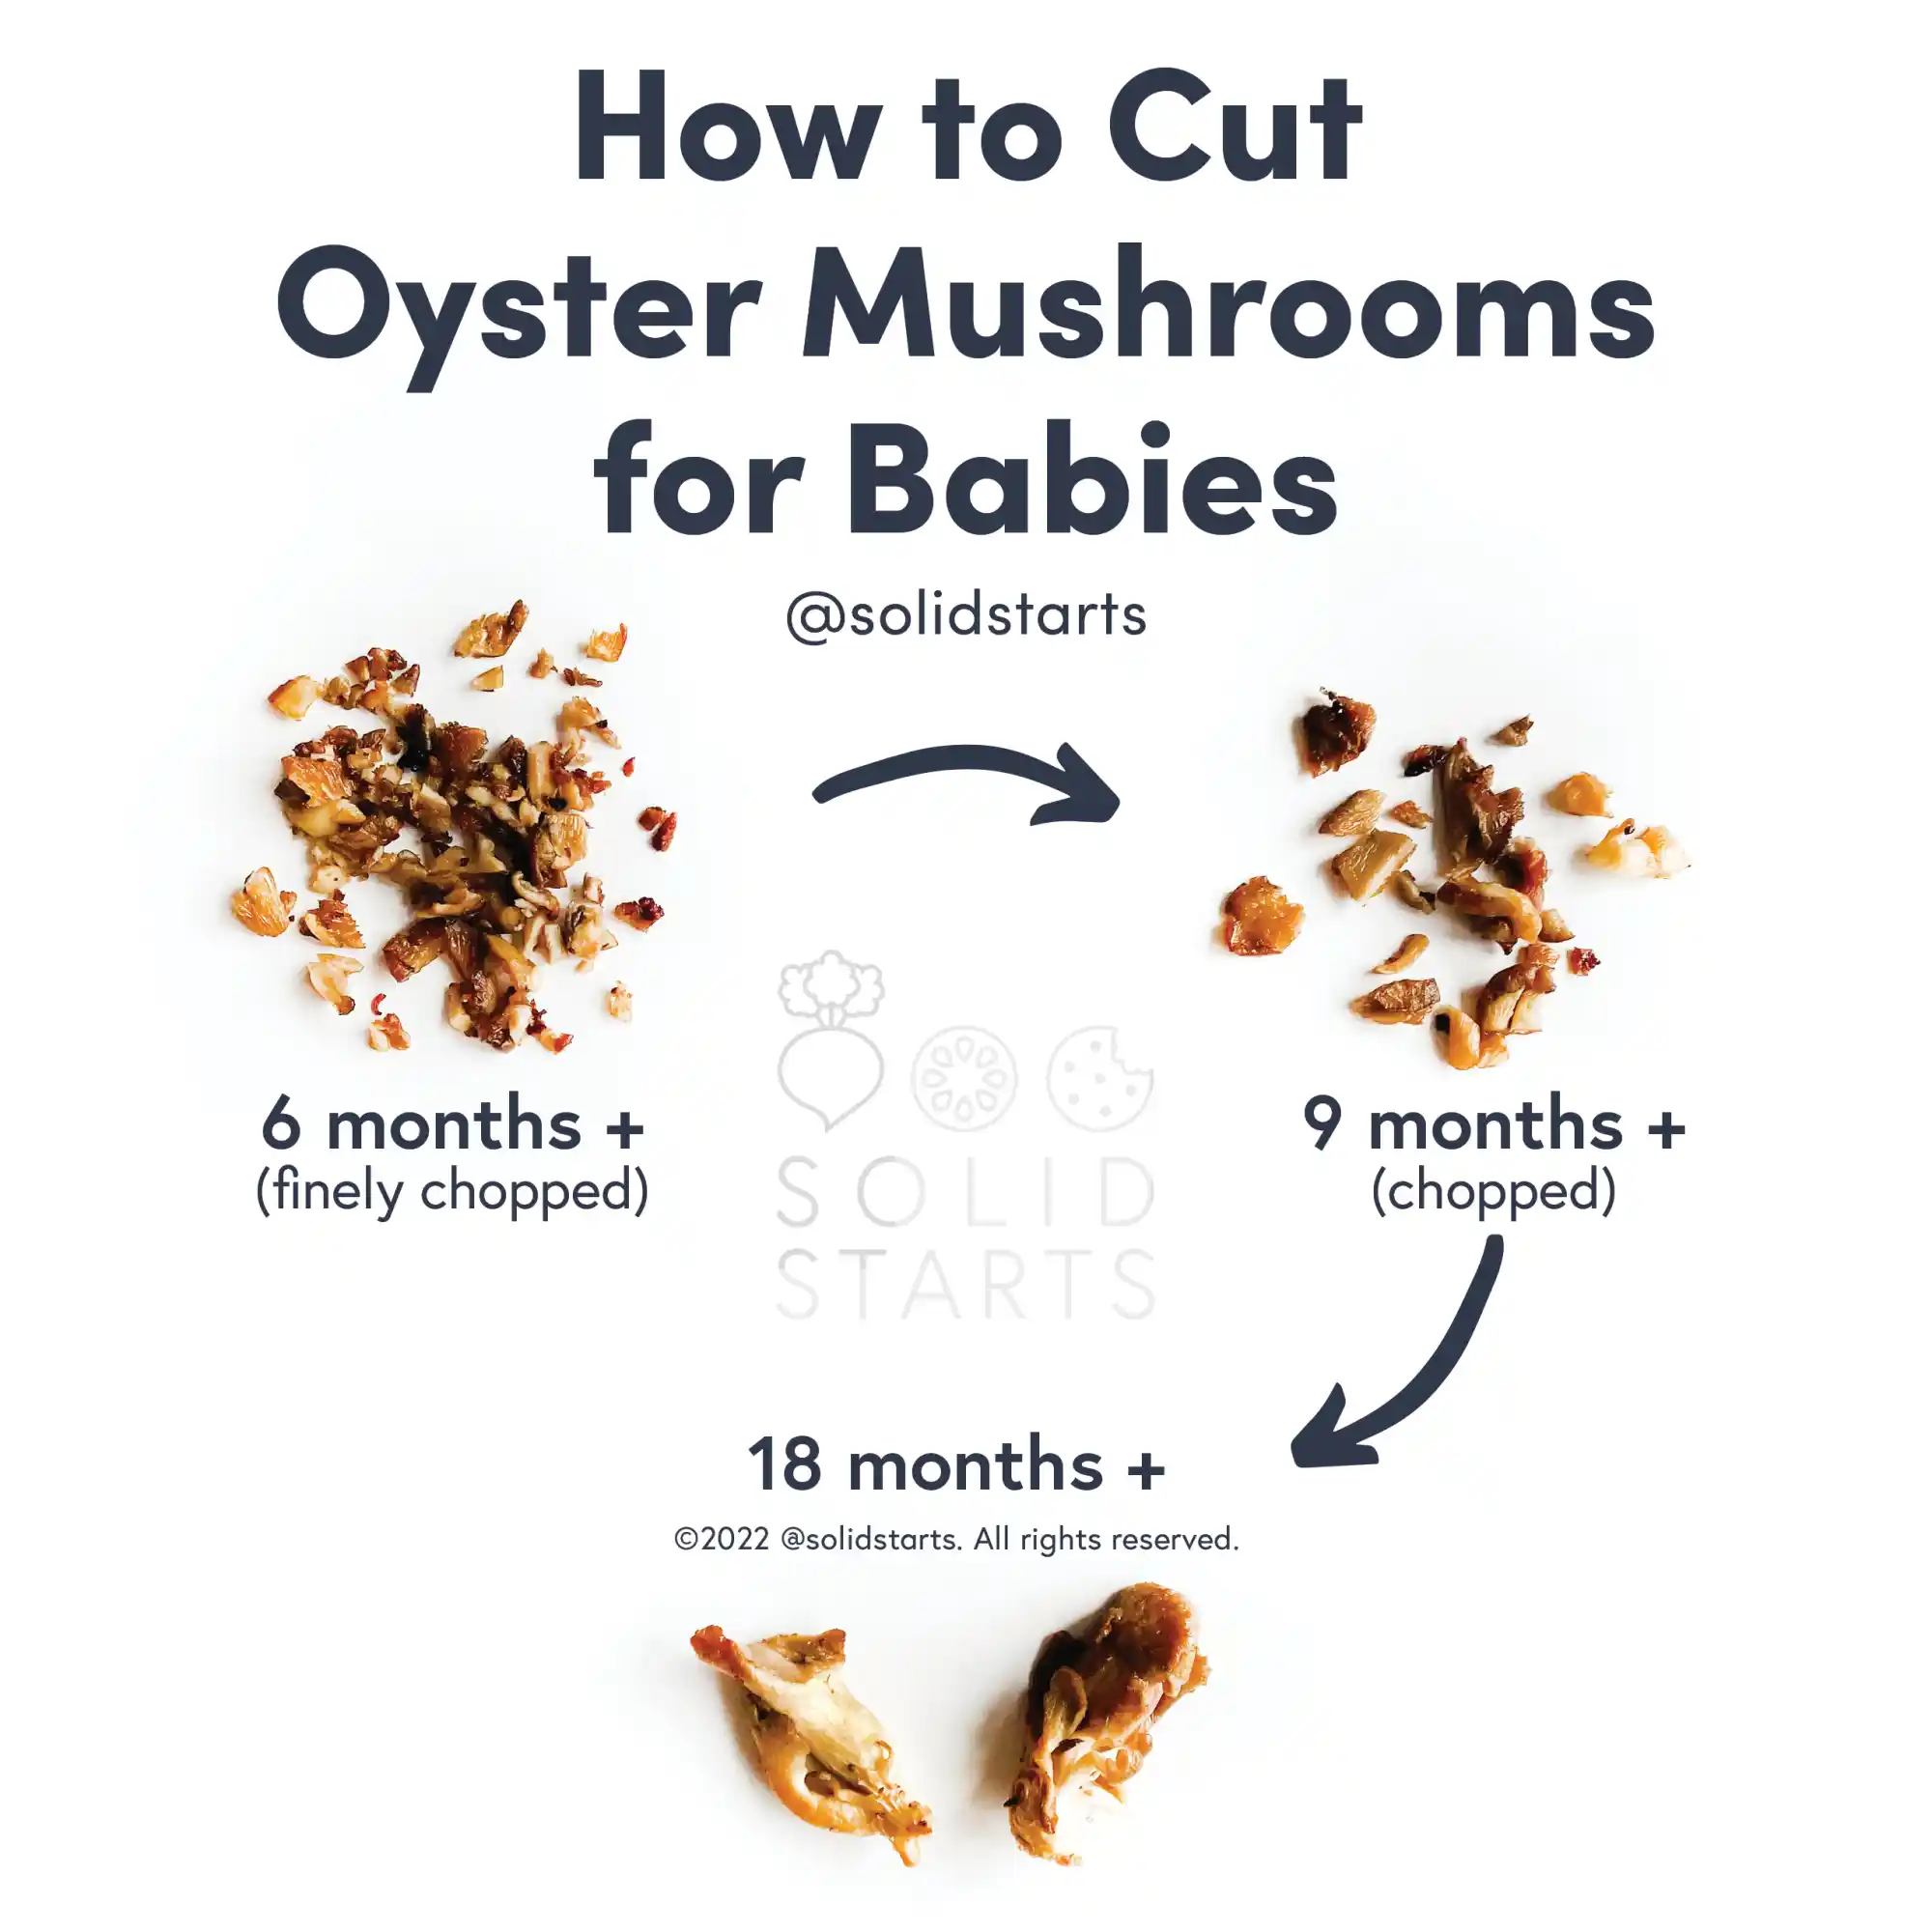 a Solid Starts infographic with the header How to Cut Oyster Mushrooms for Babies: finely chopped for 6 months+, chopped for 9 months+, and larger pieces for 18 months+